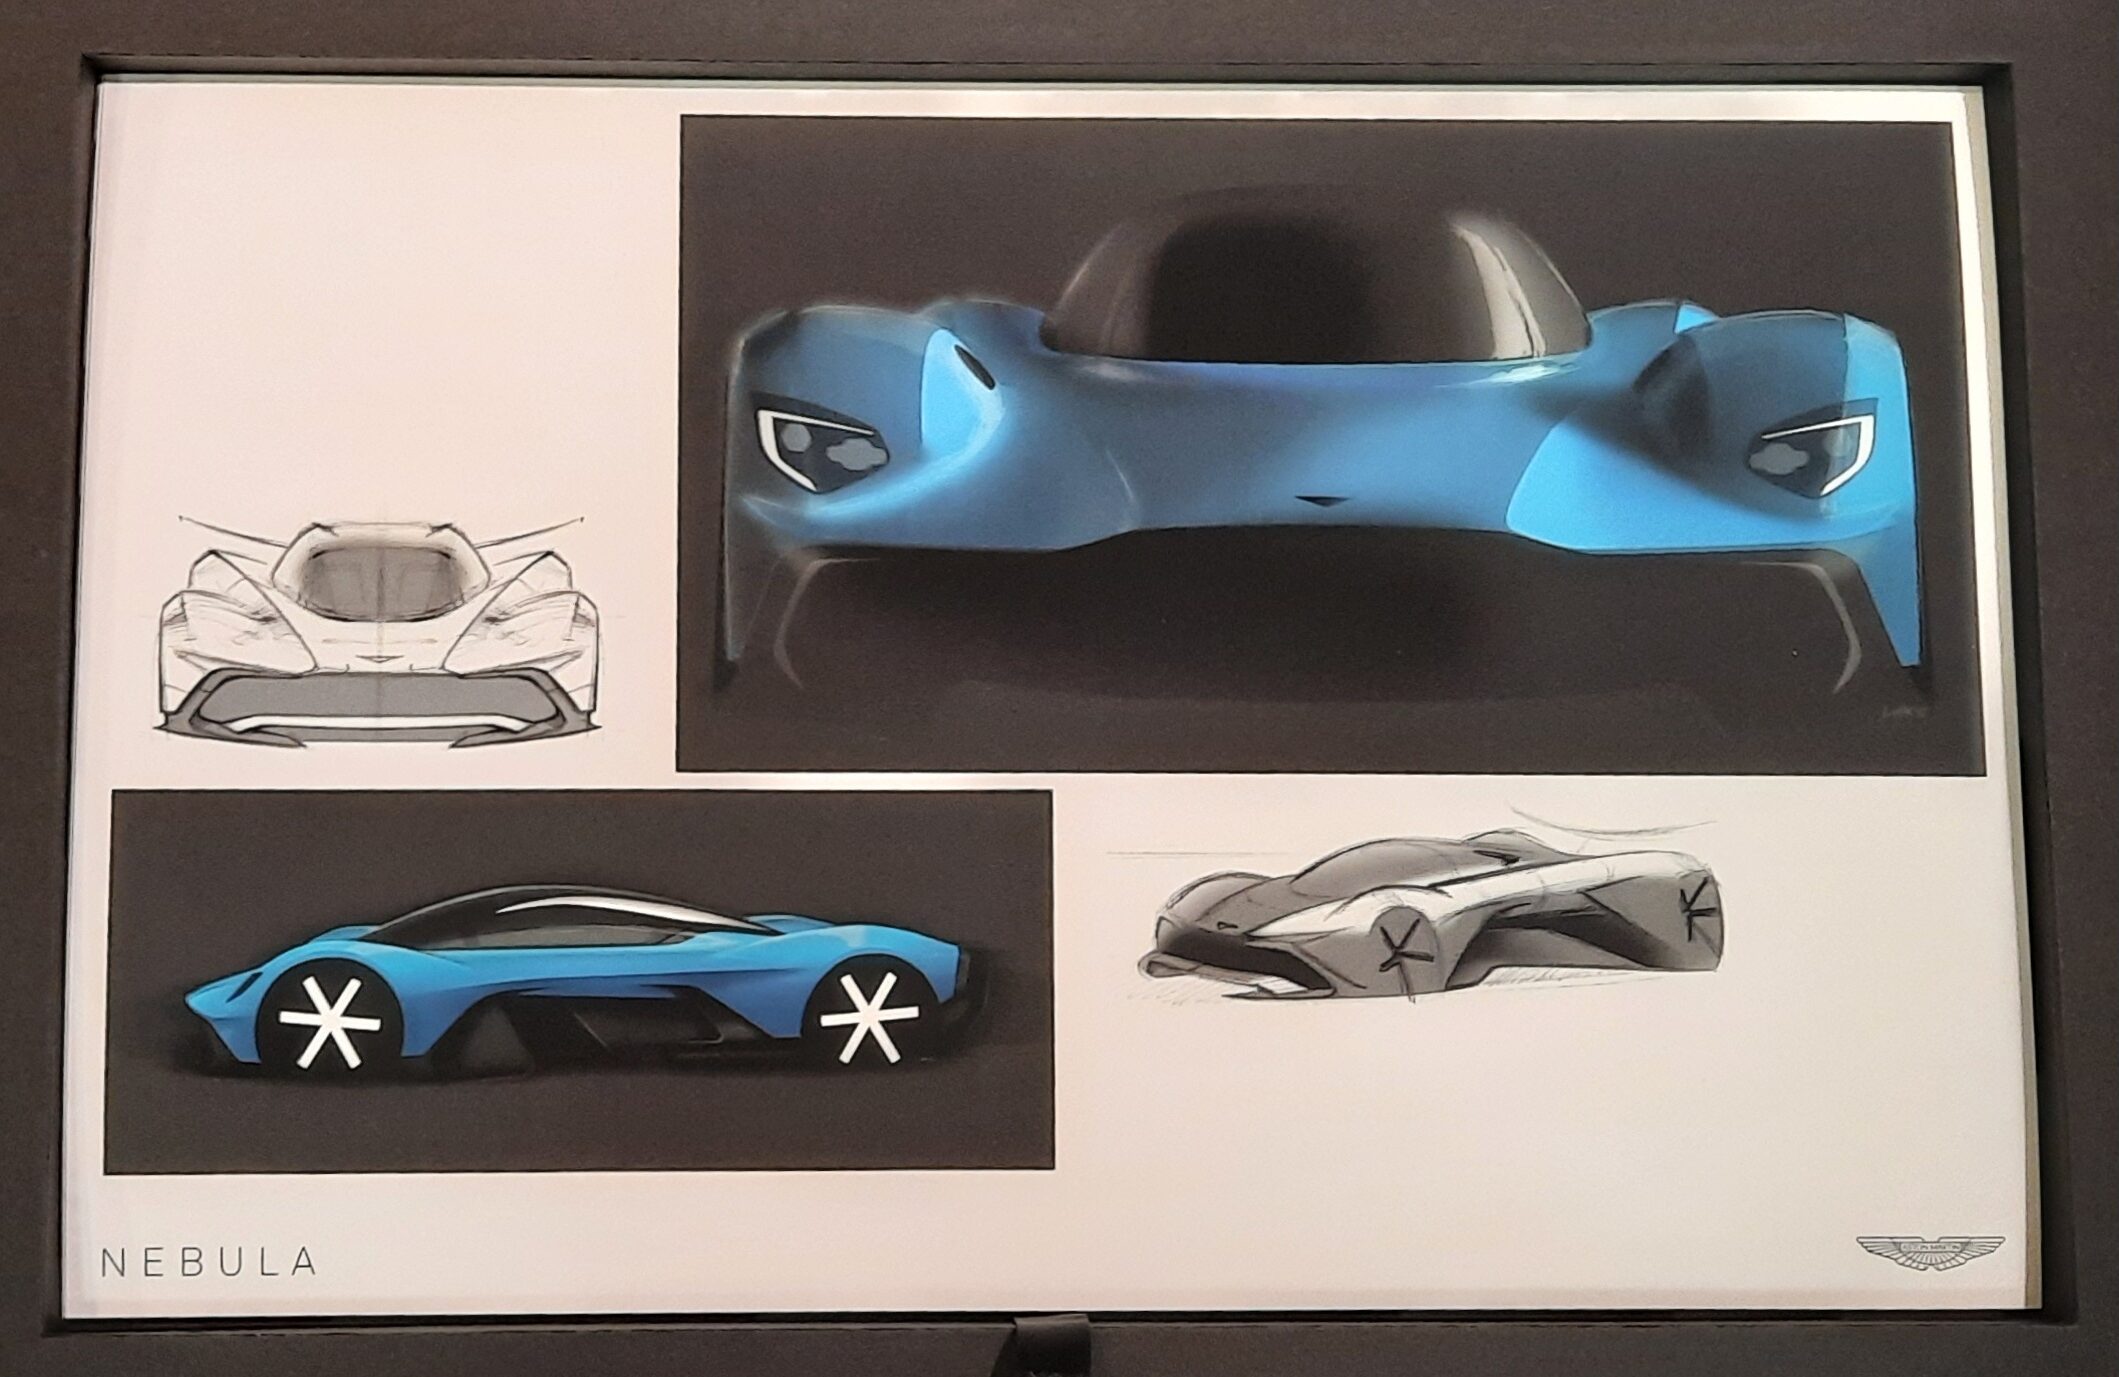 A card from the Nebula Collaboration Presentation Box showing drawings for the car from different angles, some with blue bodywork